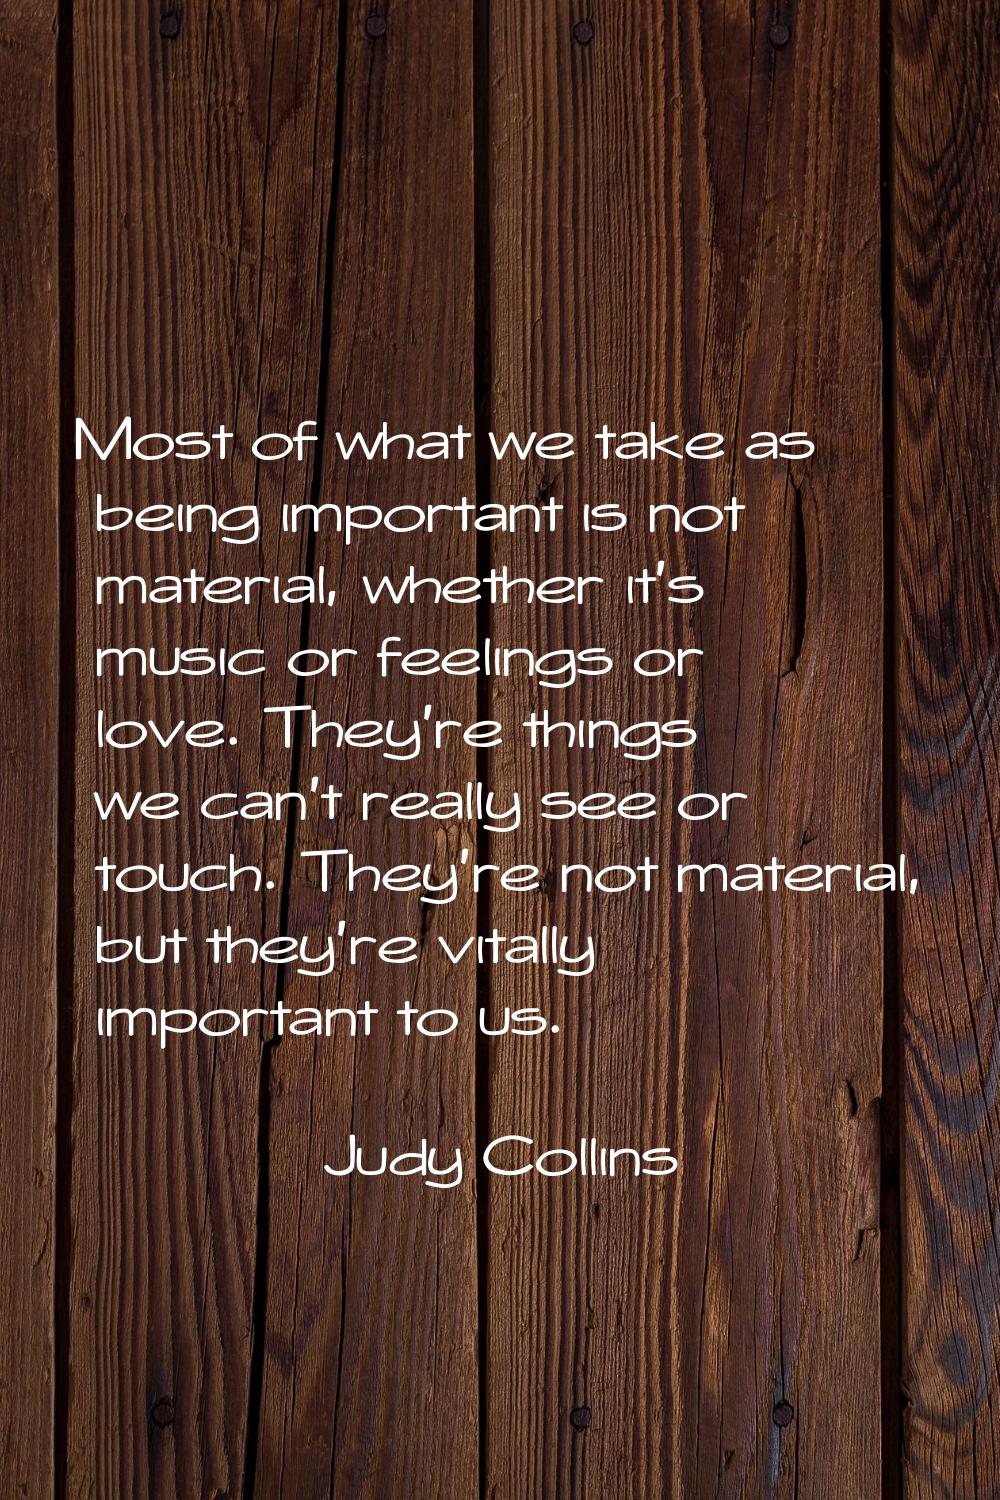 Most of what we take as being important is not material, whether it's music or feelings or love. Th